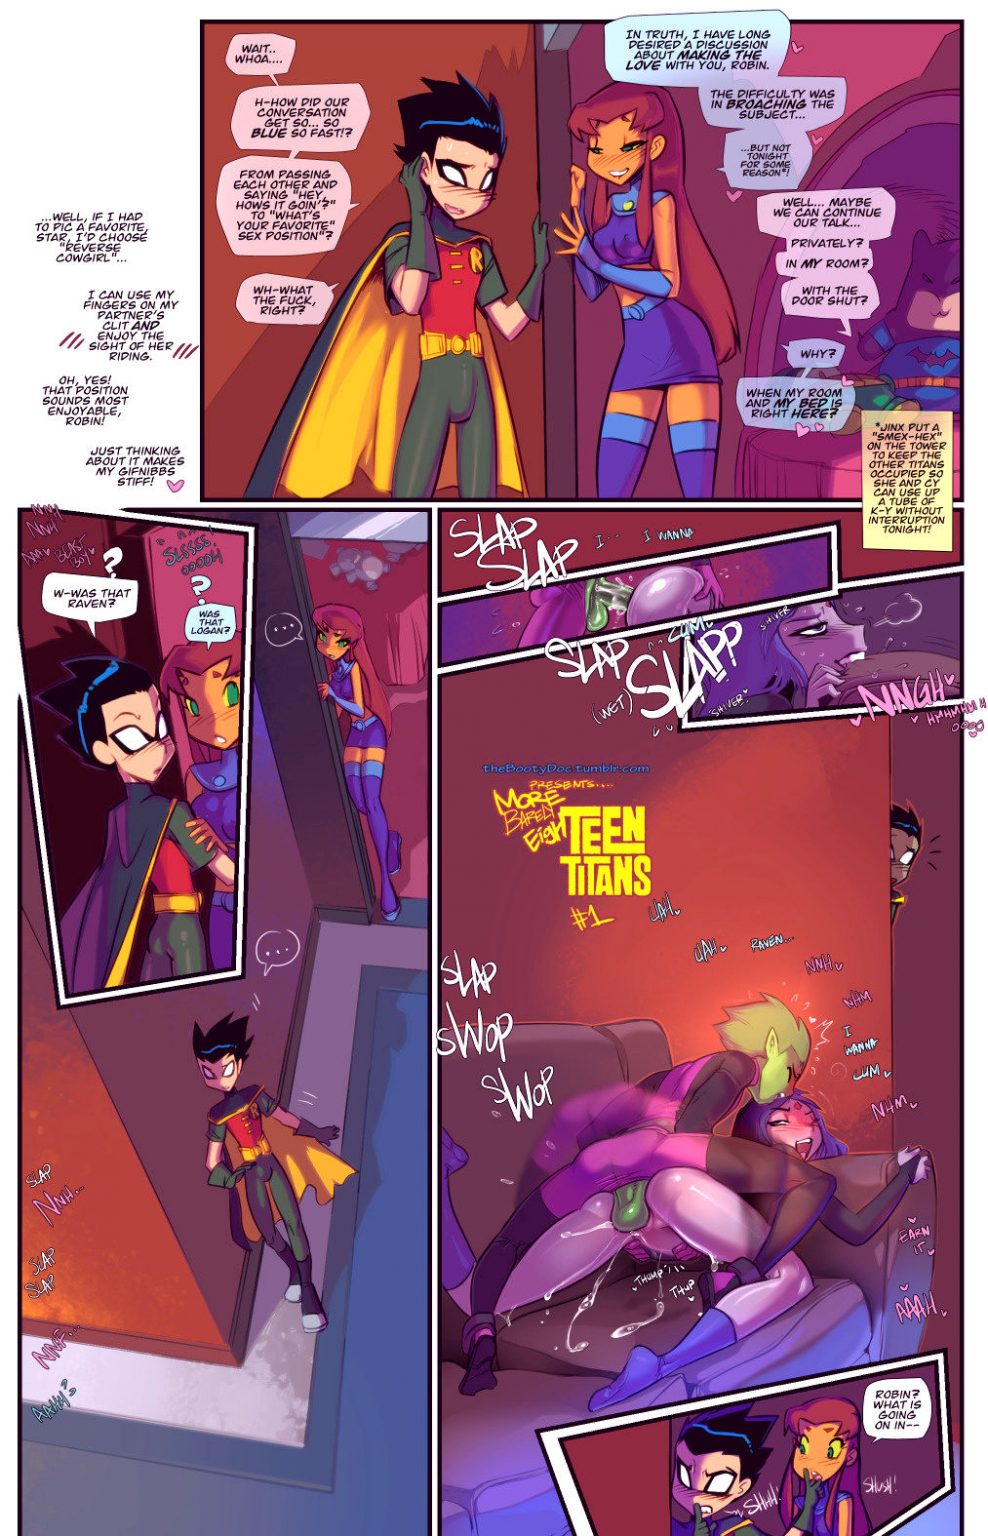 Barely eighteen titans 2 porn comic picture 1